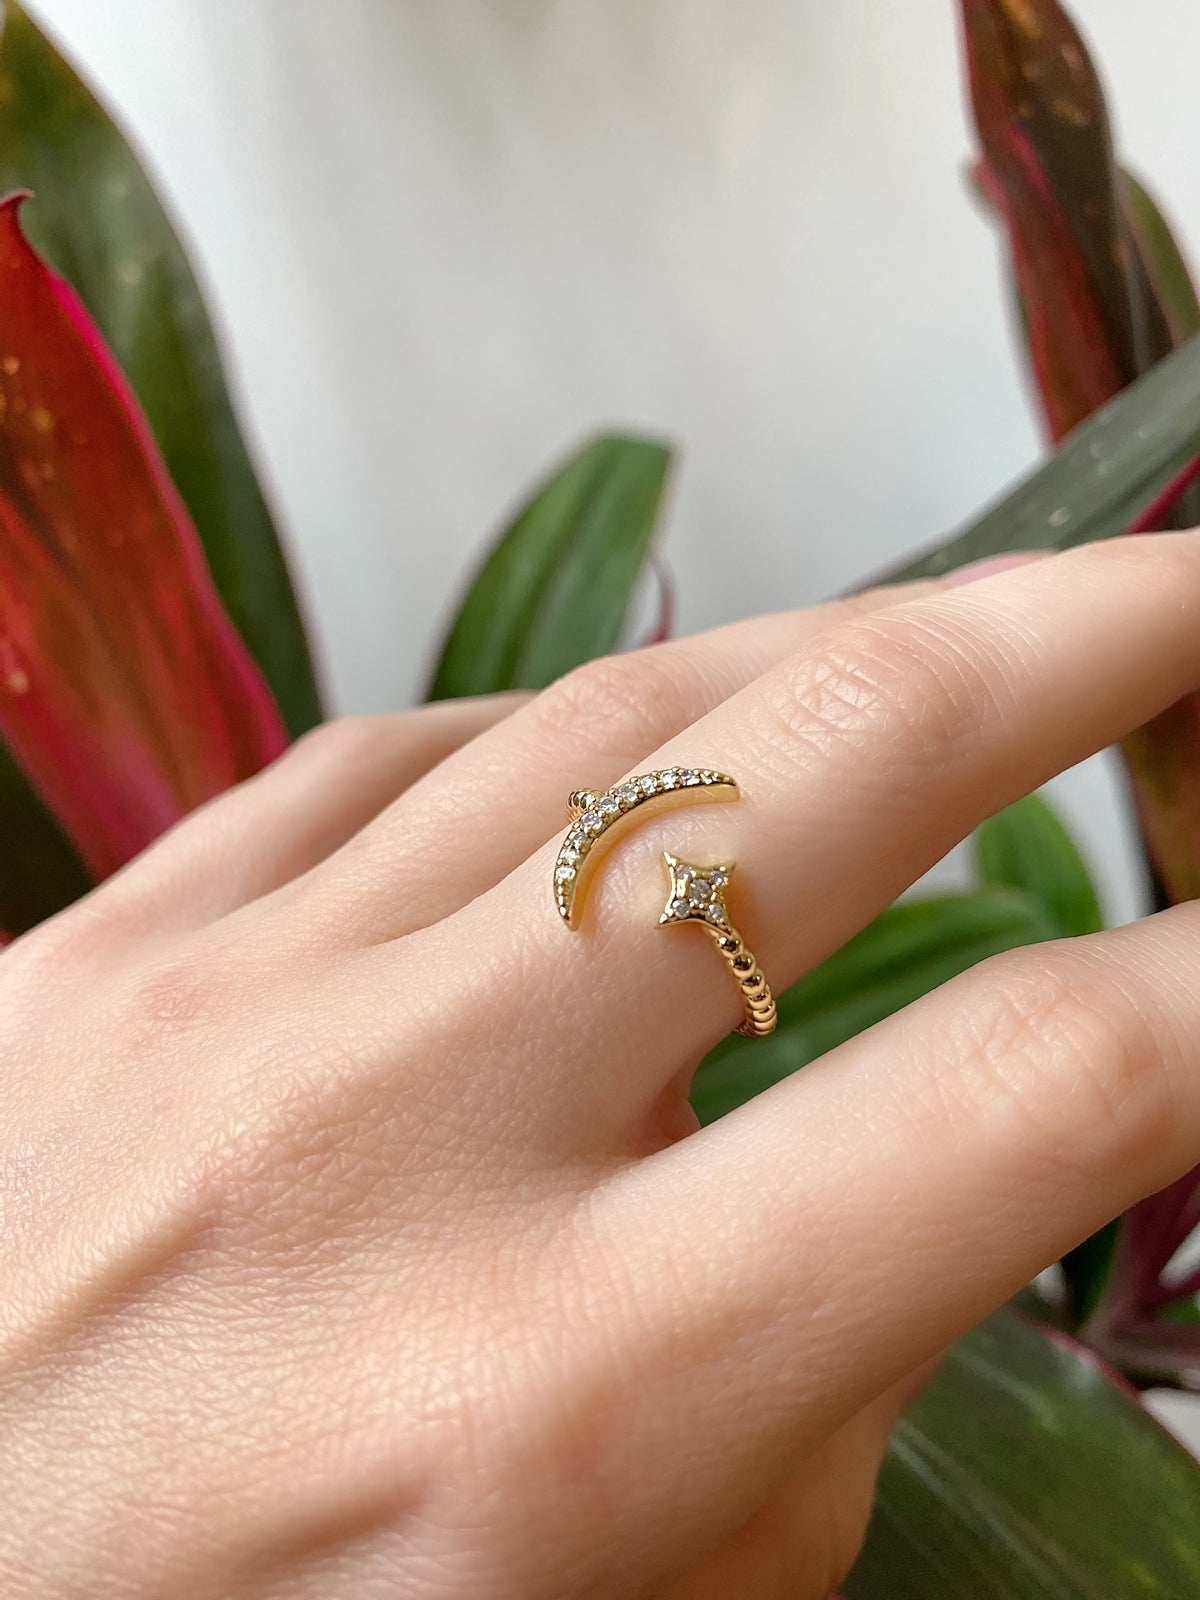 Nuance Crescent Moon Ring